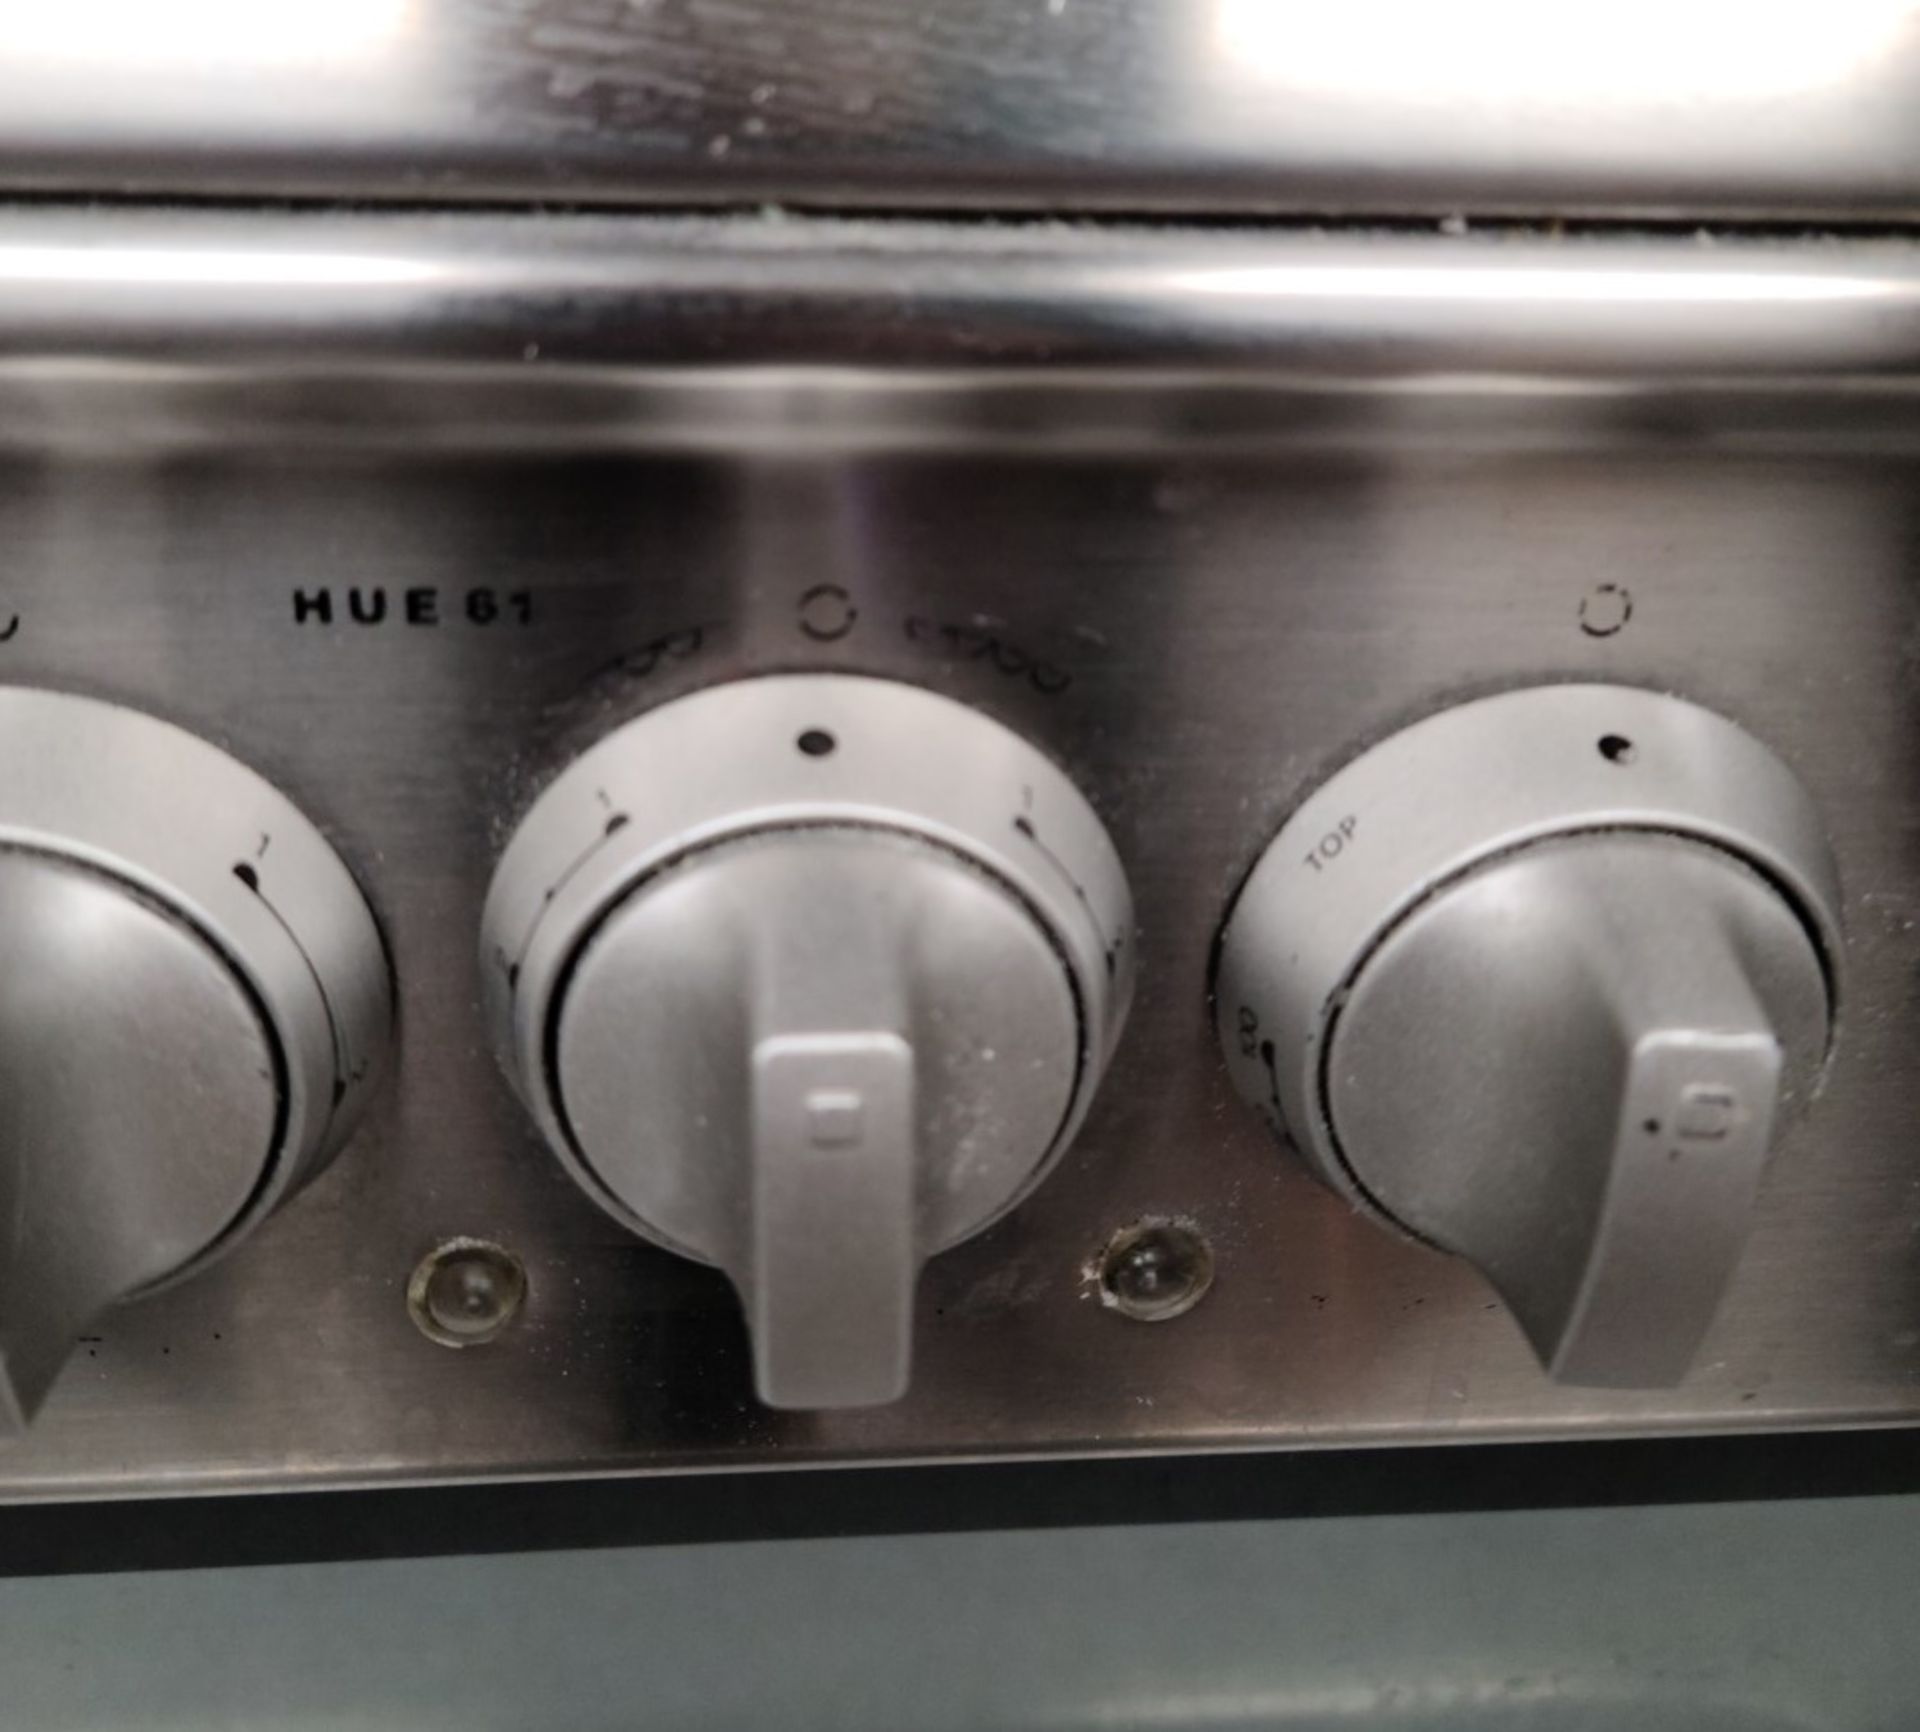 1 x HOTPOINT HUI611X Electric Cooker In Stainless Steel With Electric Fan & Conventional Oven - Image 9 of 9